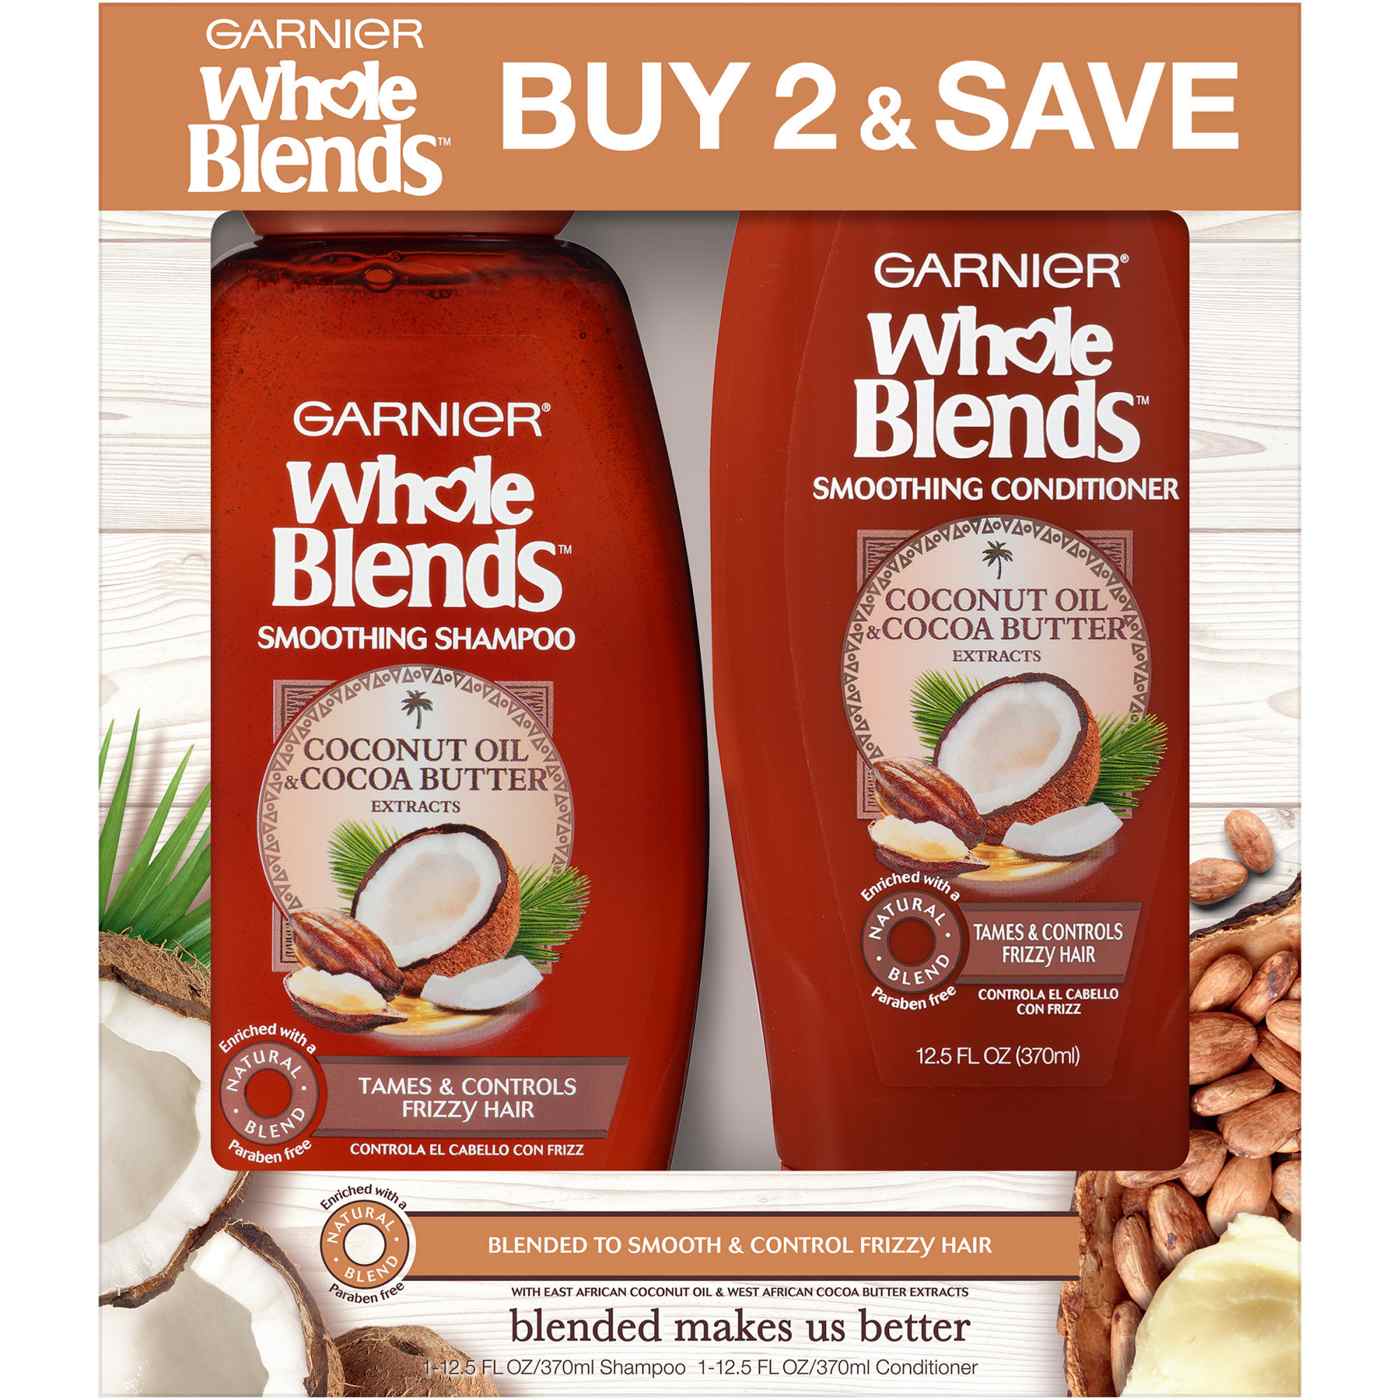 Garnier Whole Blends Smoothing Shampoo & Conditioner with Coconut Oil & Cocoa Butter; image 1 of 3